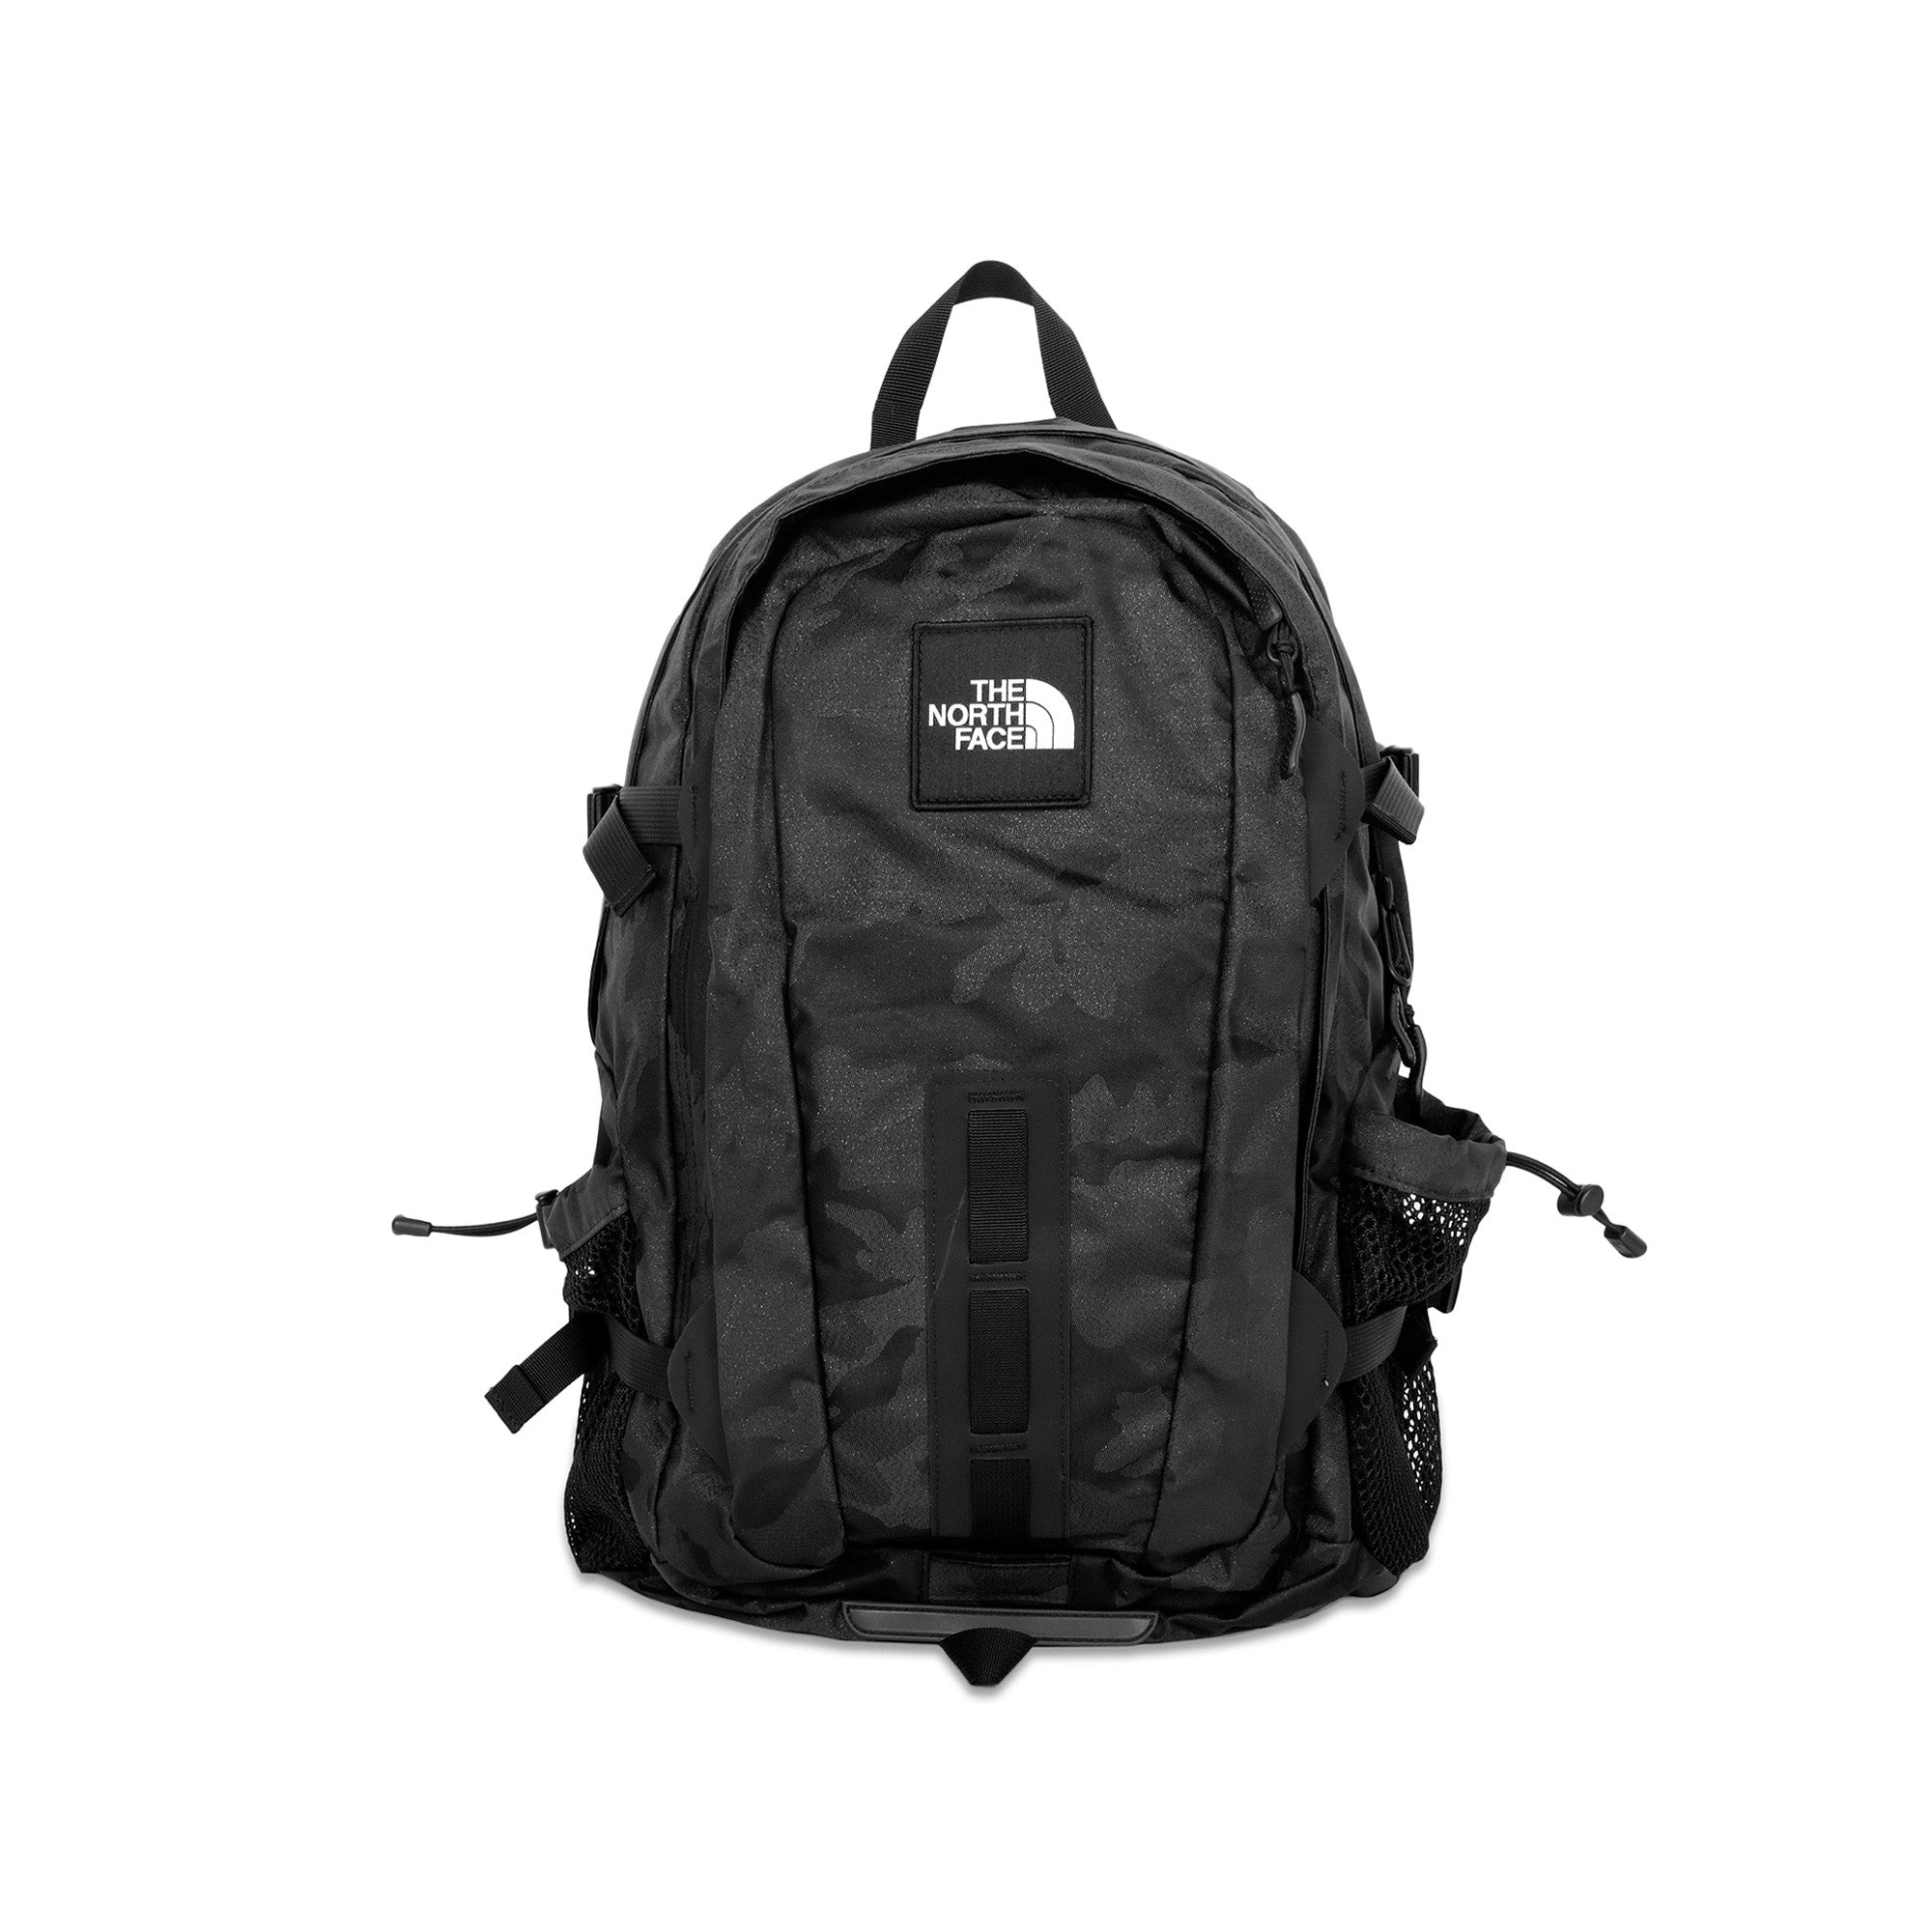 The North Face Hot Shot - Black Camo – Extra Butter